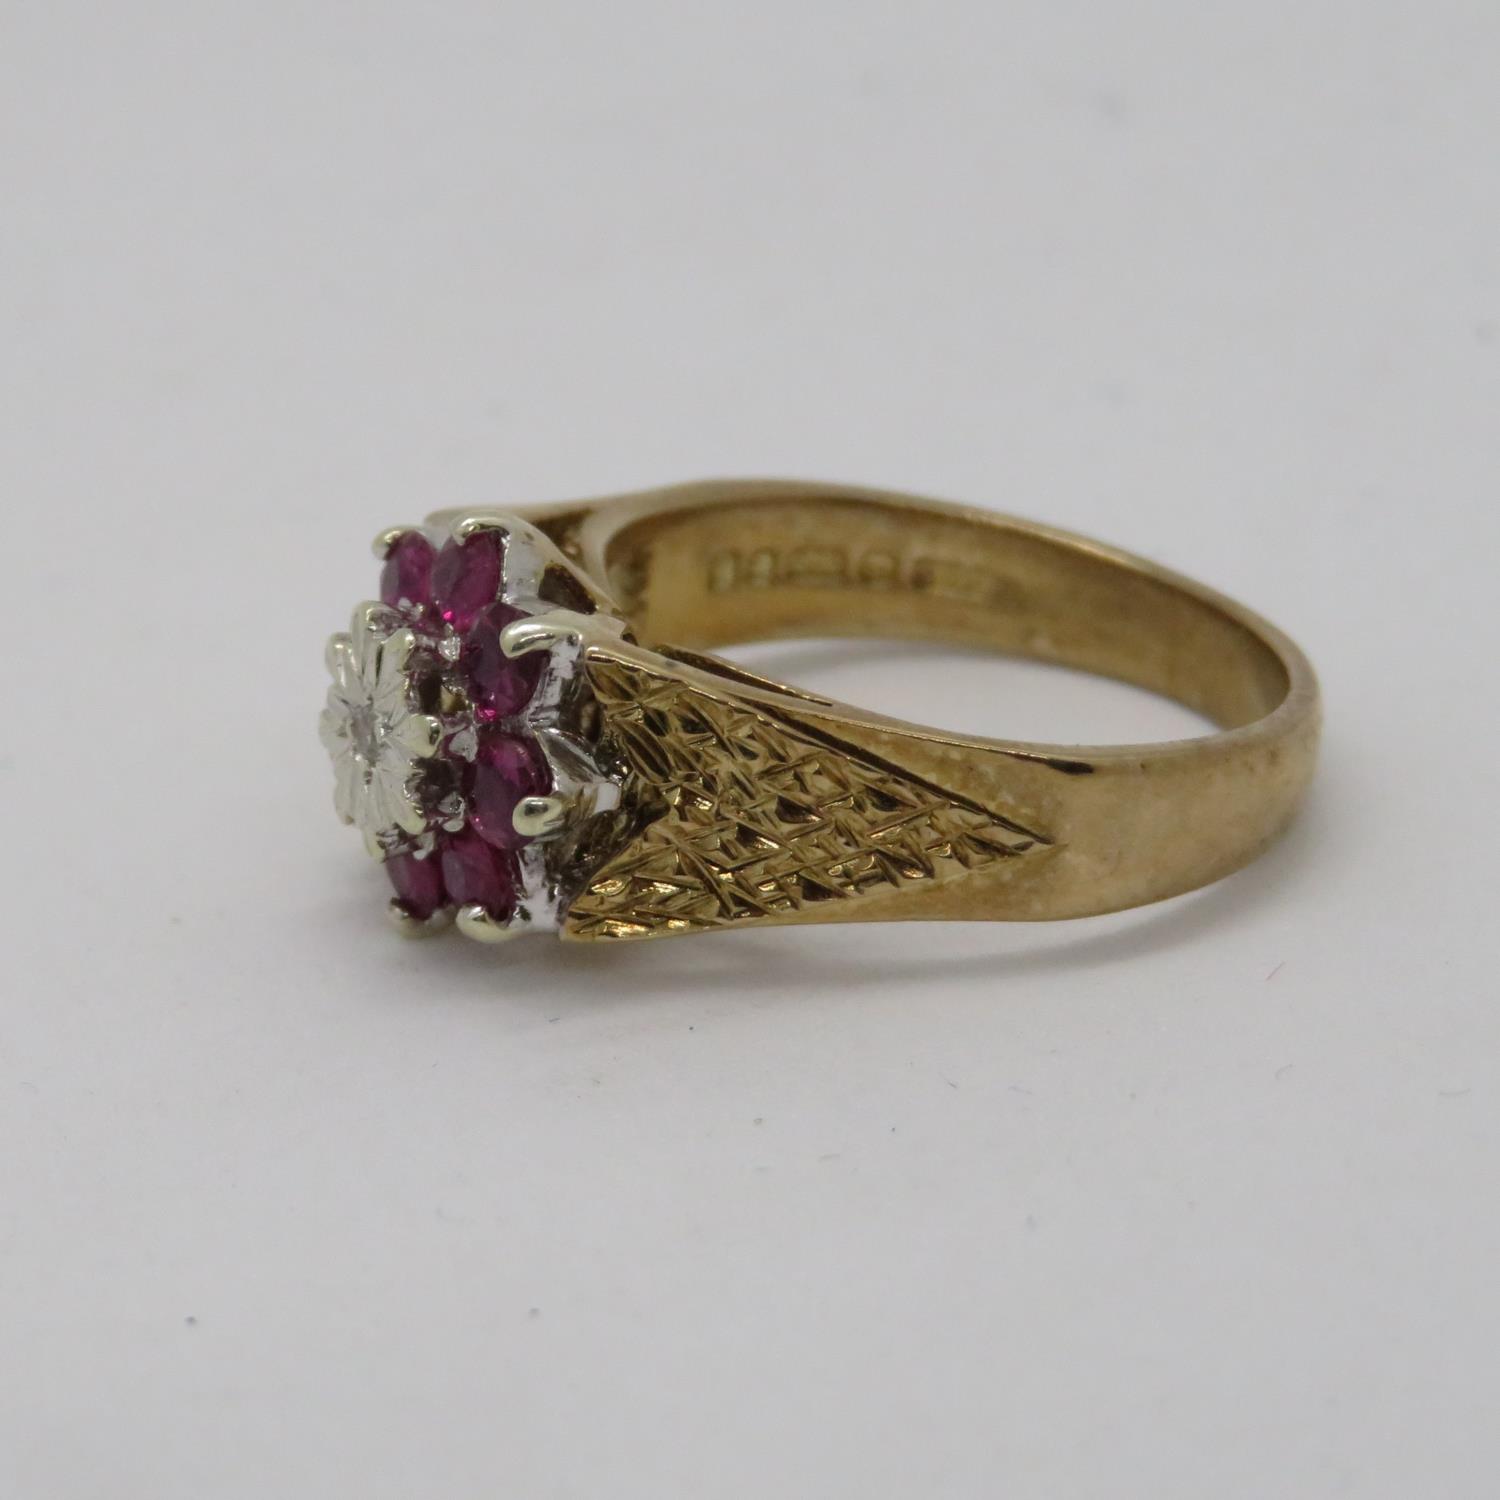 Ruby and diamond cluster ring HM 9ct gold with bark effect shoulders 3.5g size S - Image 3 of 3